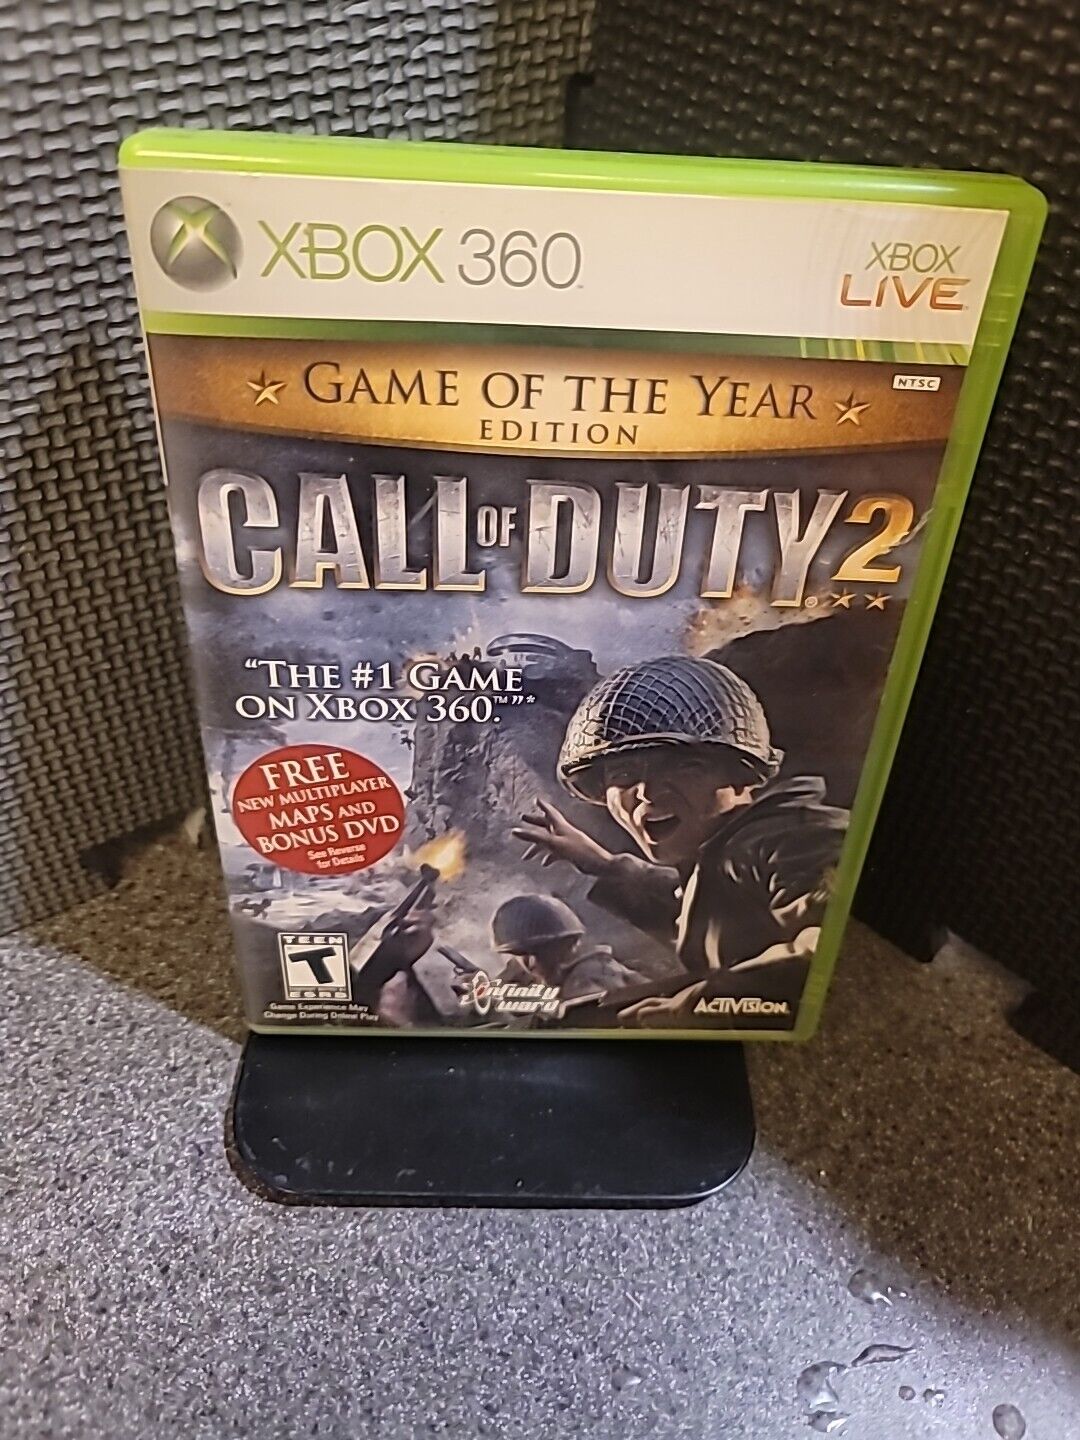 Call of Duty 2 -- Game of the Year Edition (Microsoft Xbox 360, 2006) CIB